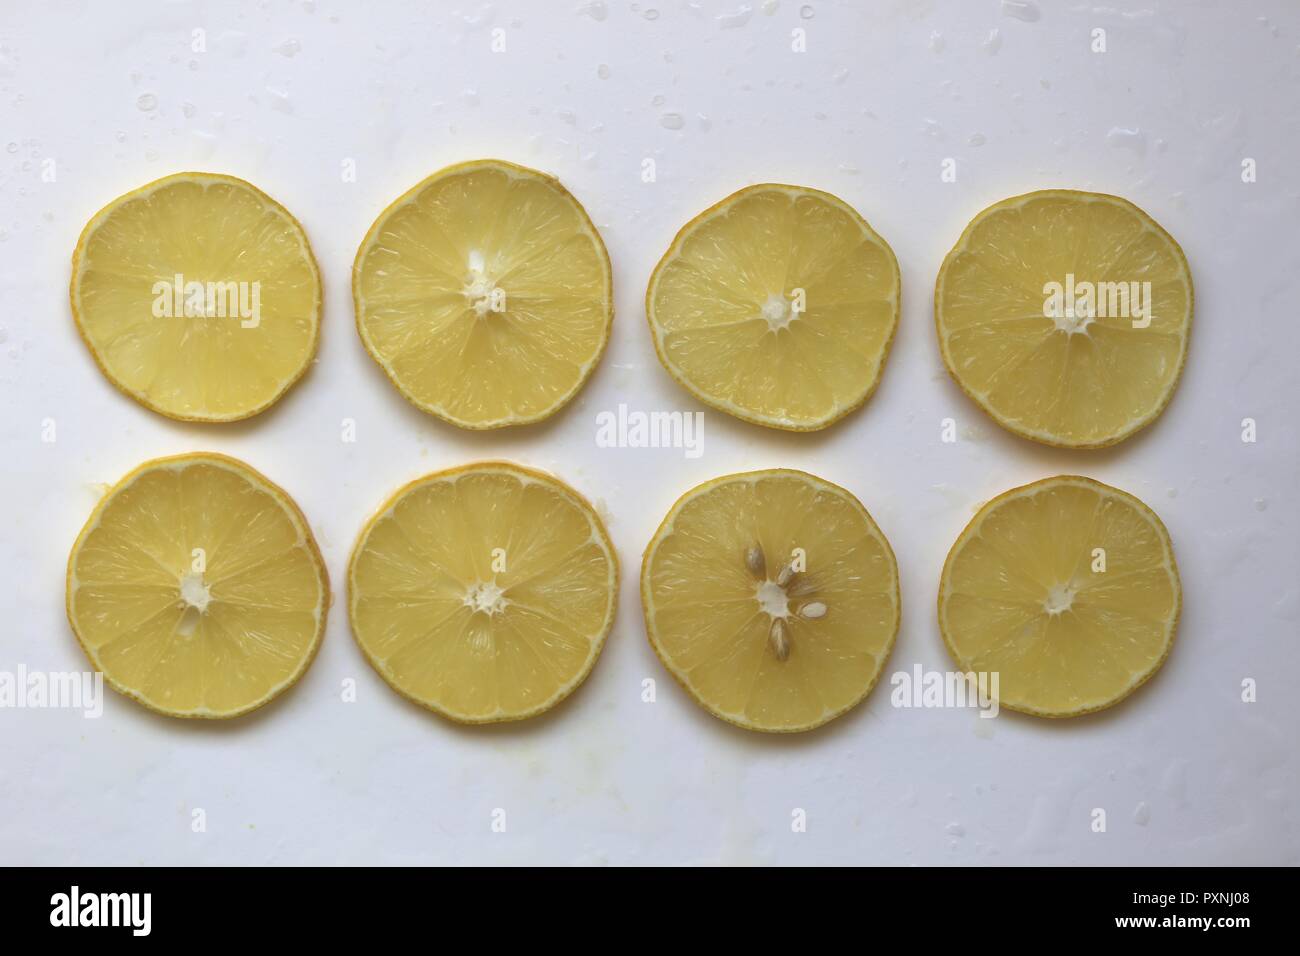 Lemon Slices. Eight round lemon slices in two lines, top view, close up, on wet white surface background. Stock Photo